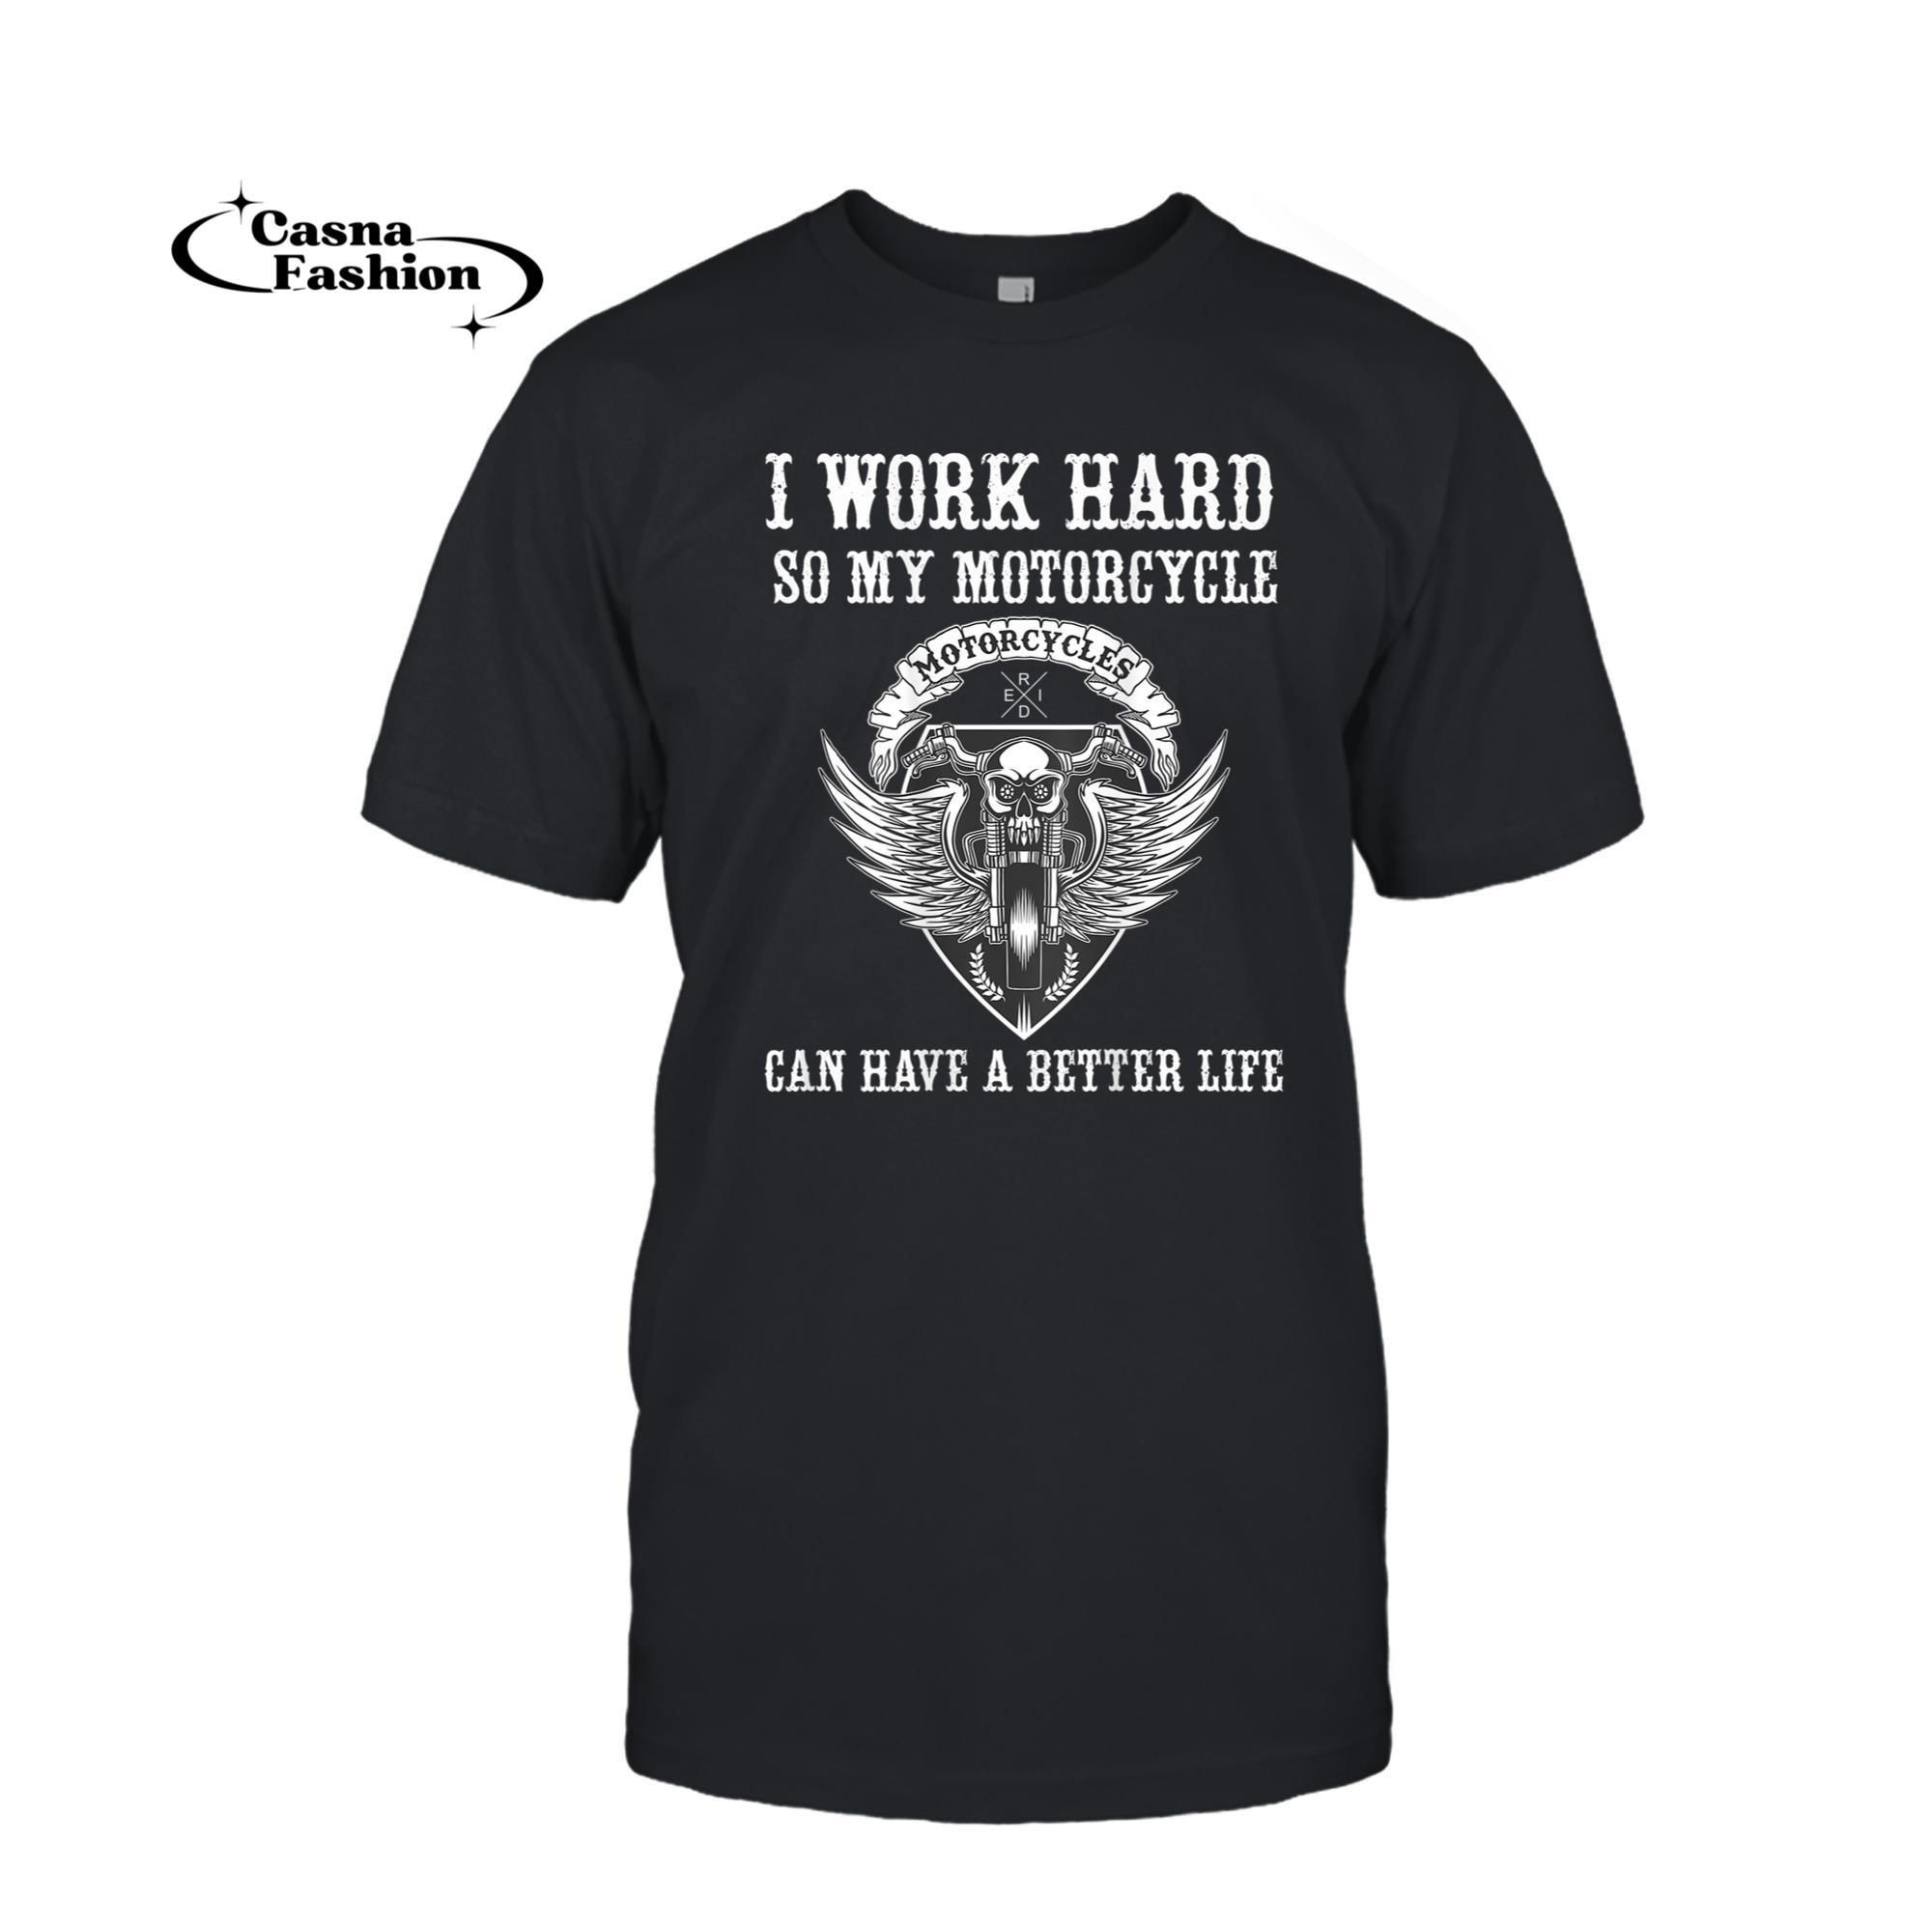 casnafashion_T-shirt_Work Hard Funny Motorcycle Quote Skull Angel Wings - on Back T-Shirt_T-shirt_Black